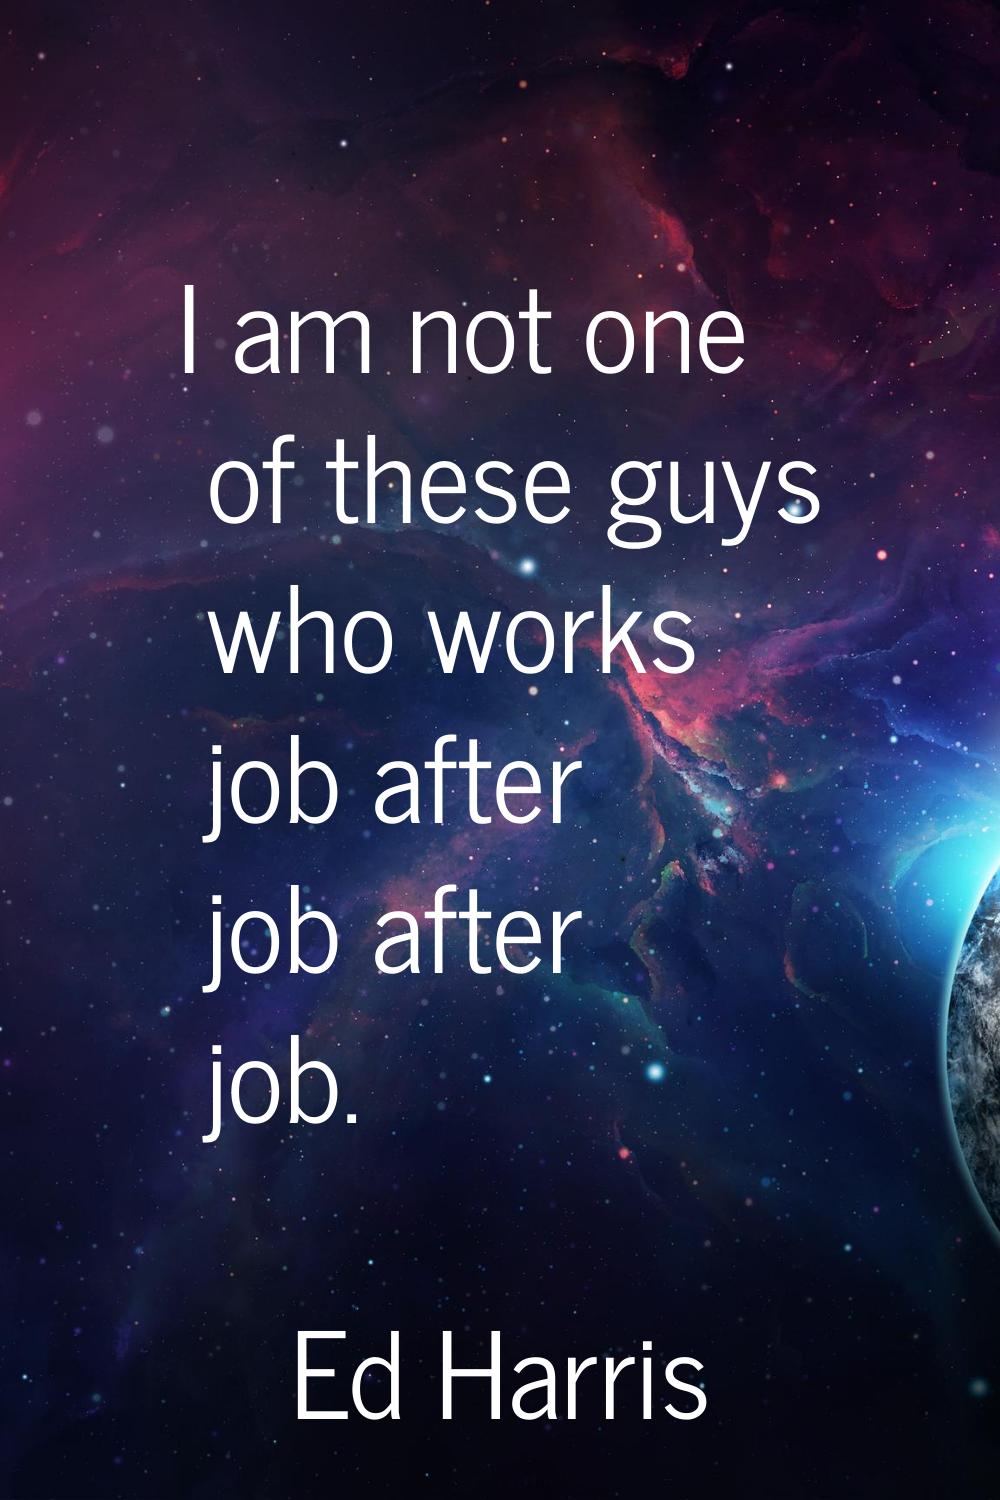 I am not one of these guys who works job after job after job.